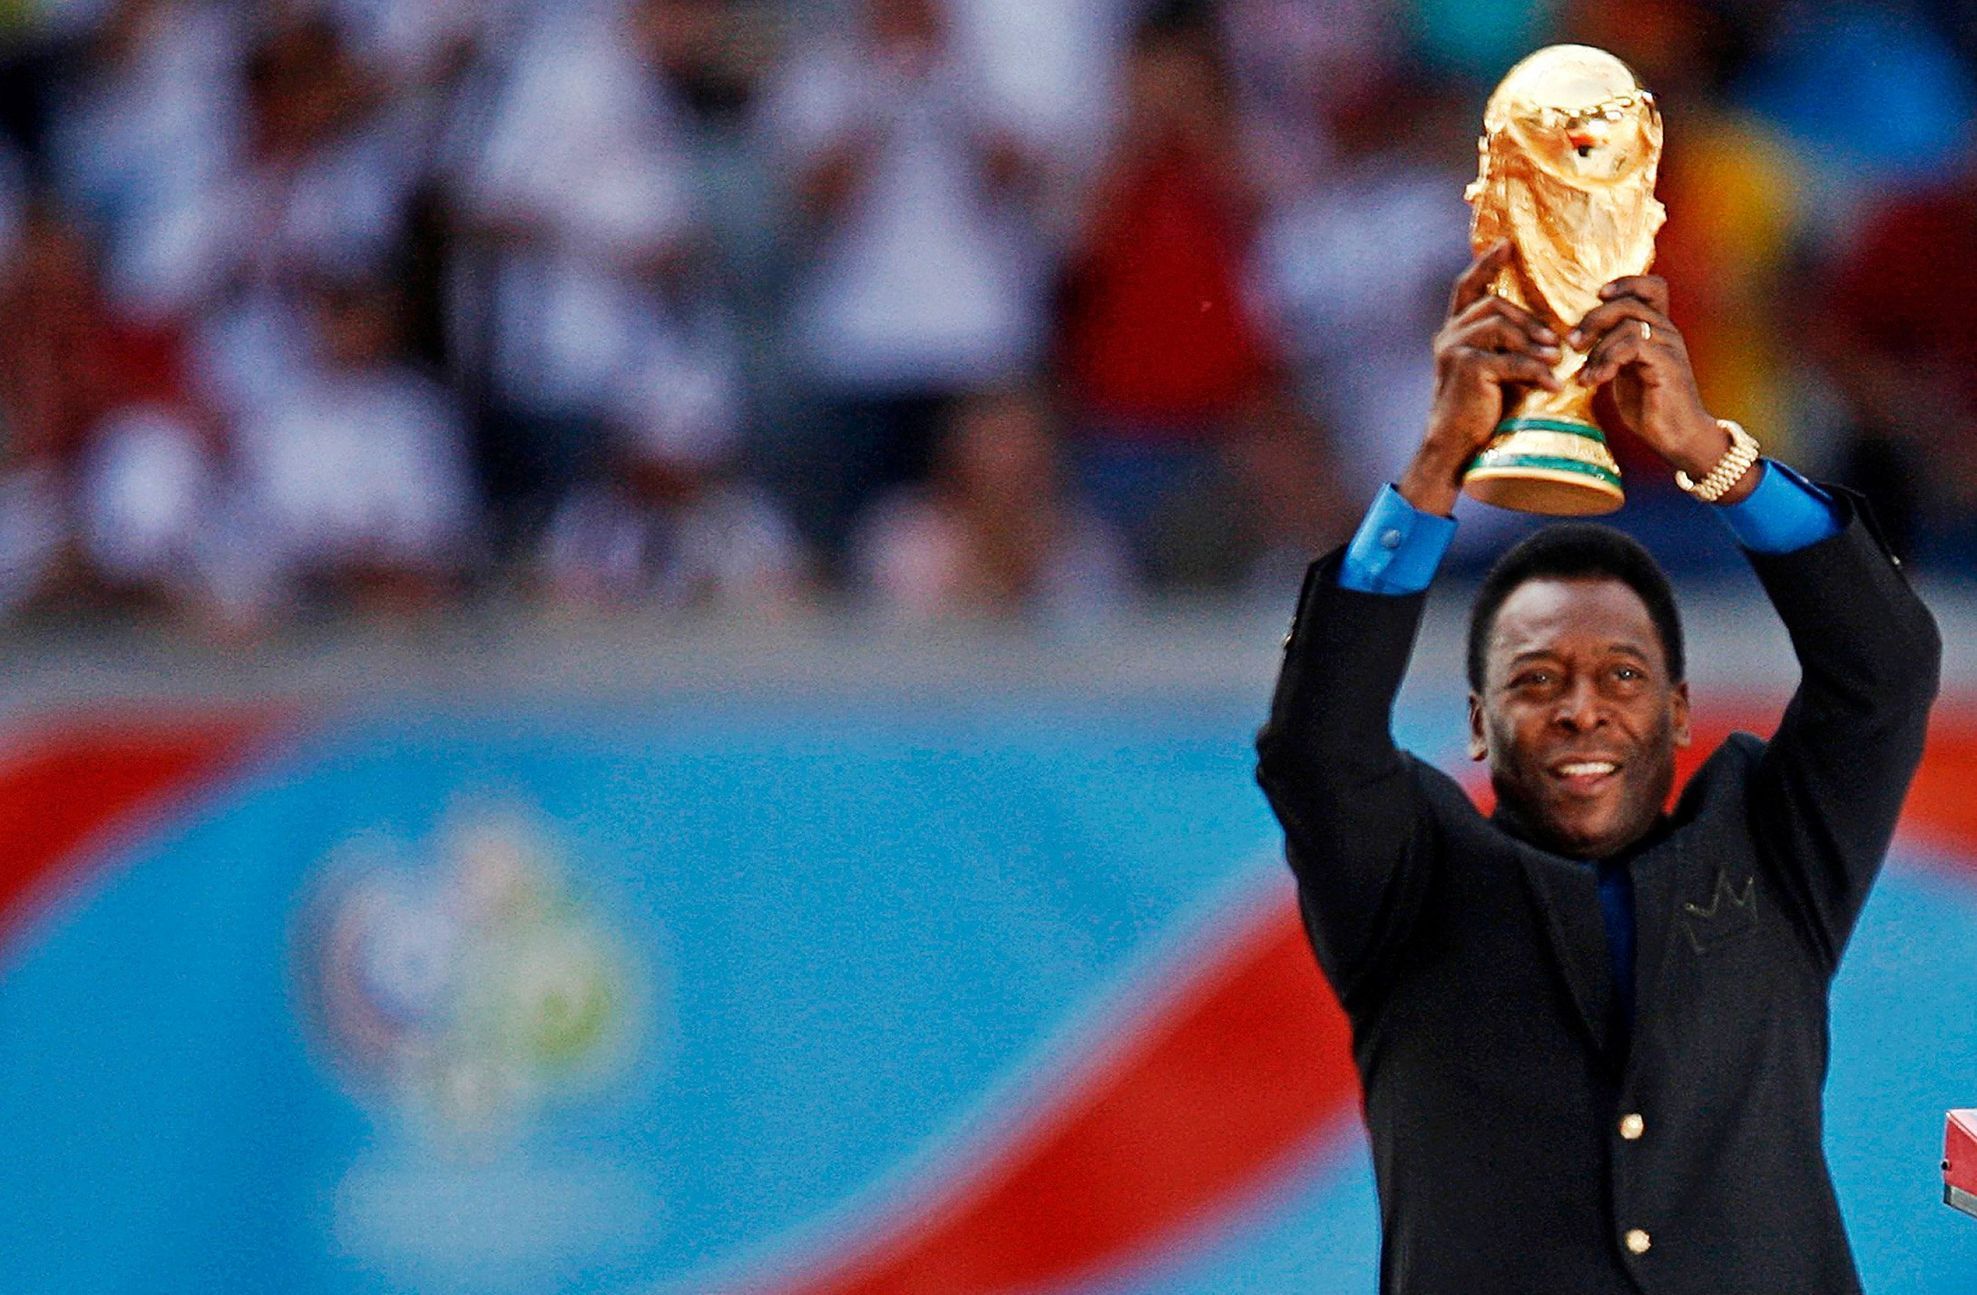 FILE PHOTO: Brazilian soccer legend Pele holds the World Cup trophy during the World Cup 2006 opening ceremony in Munich